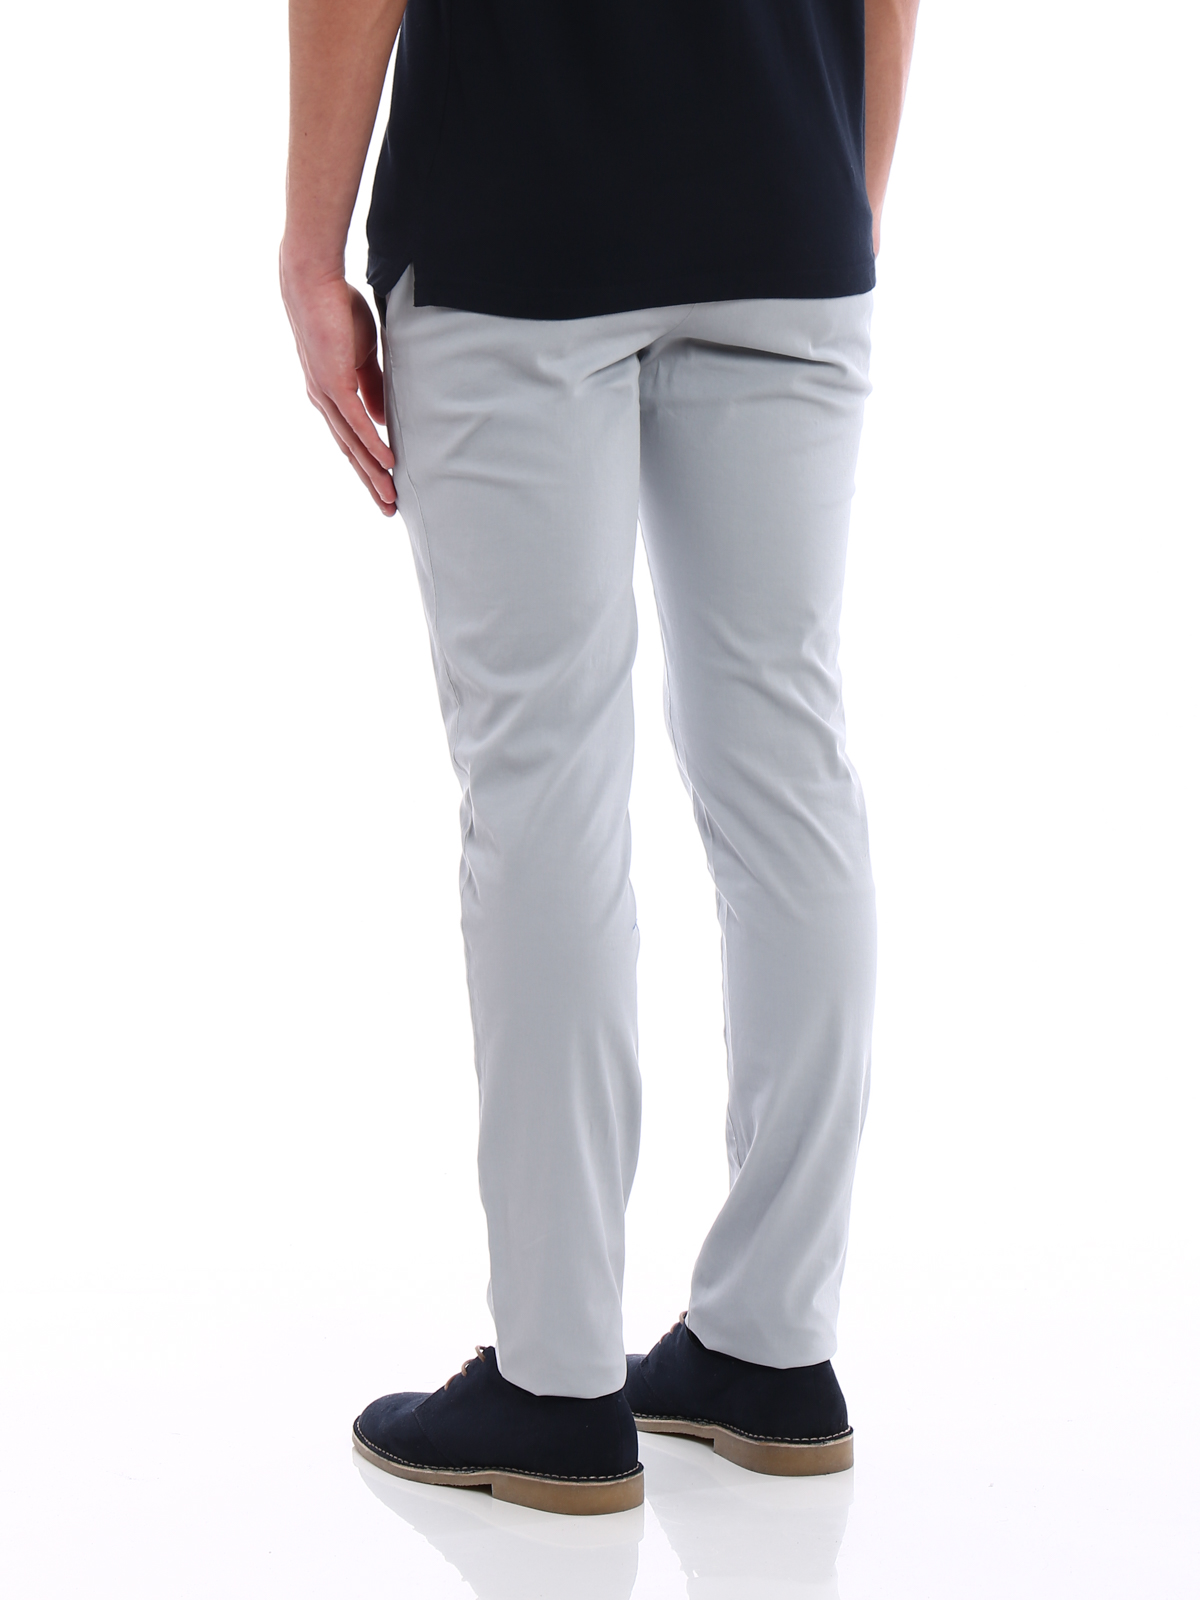 Tailored & trousers Pt Torino - Super Fit light grey chinos - CODTVRZA0ATENT850213